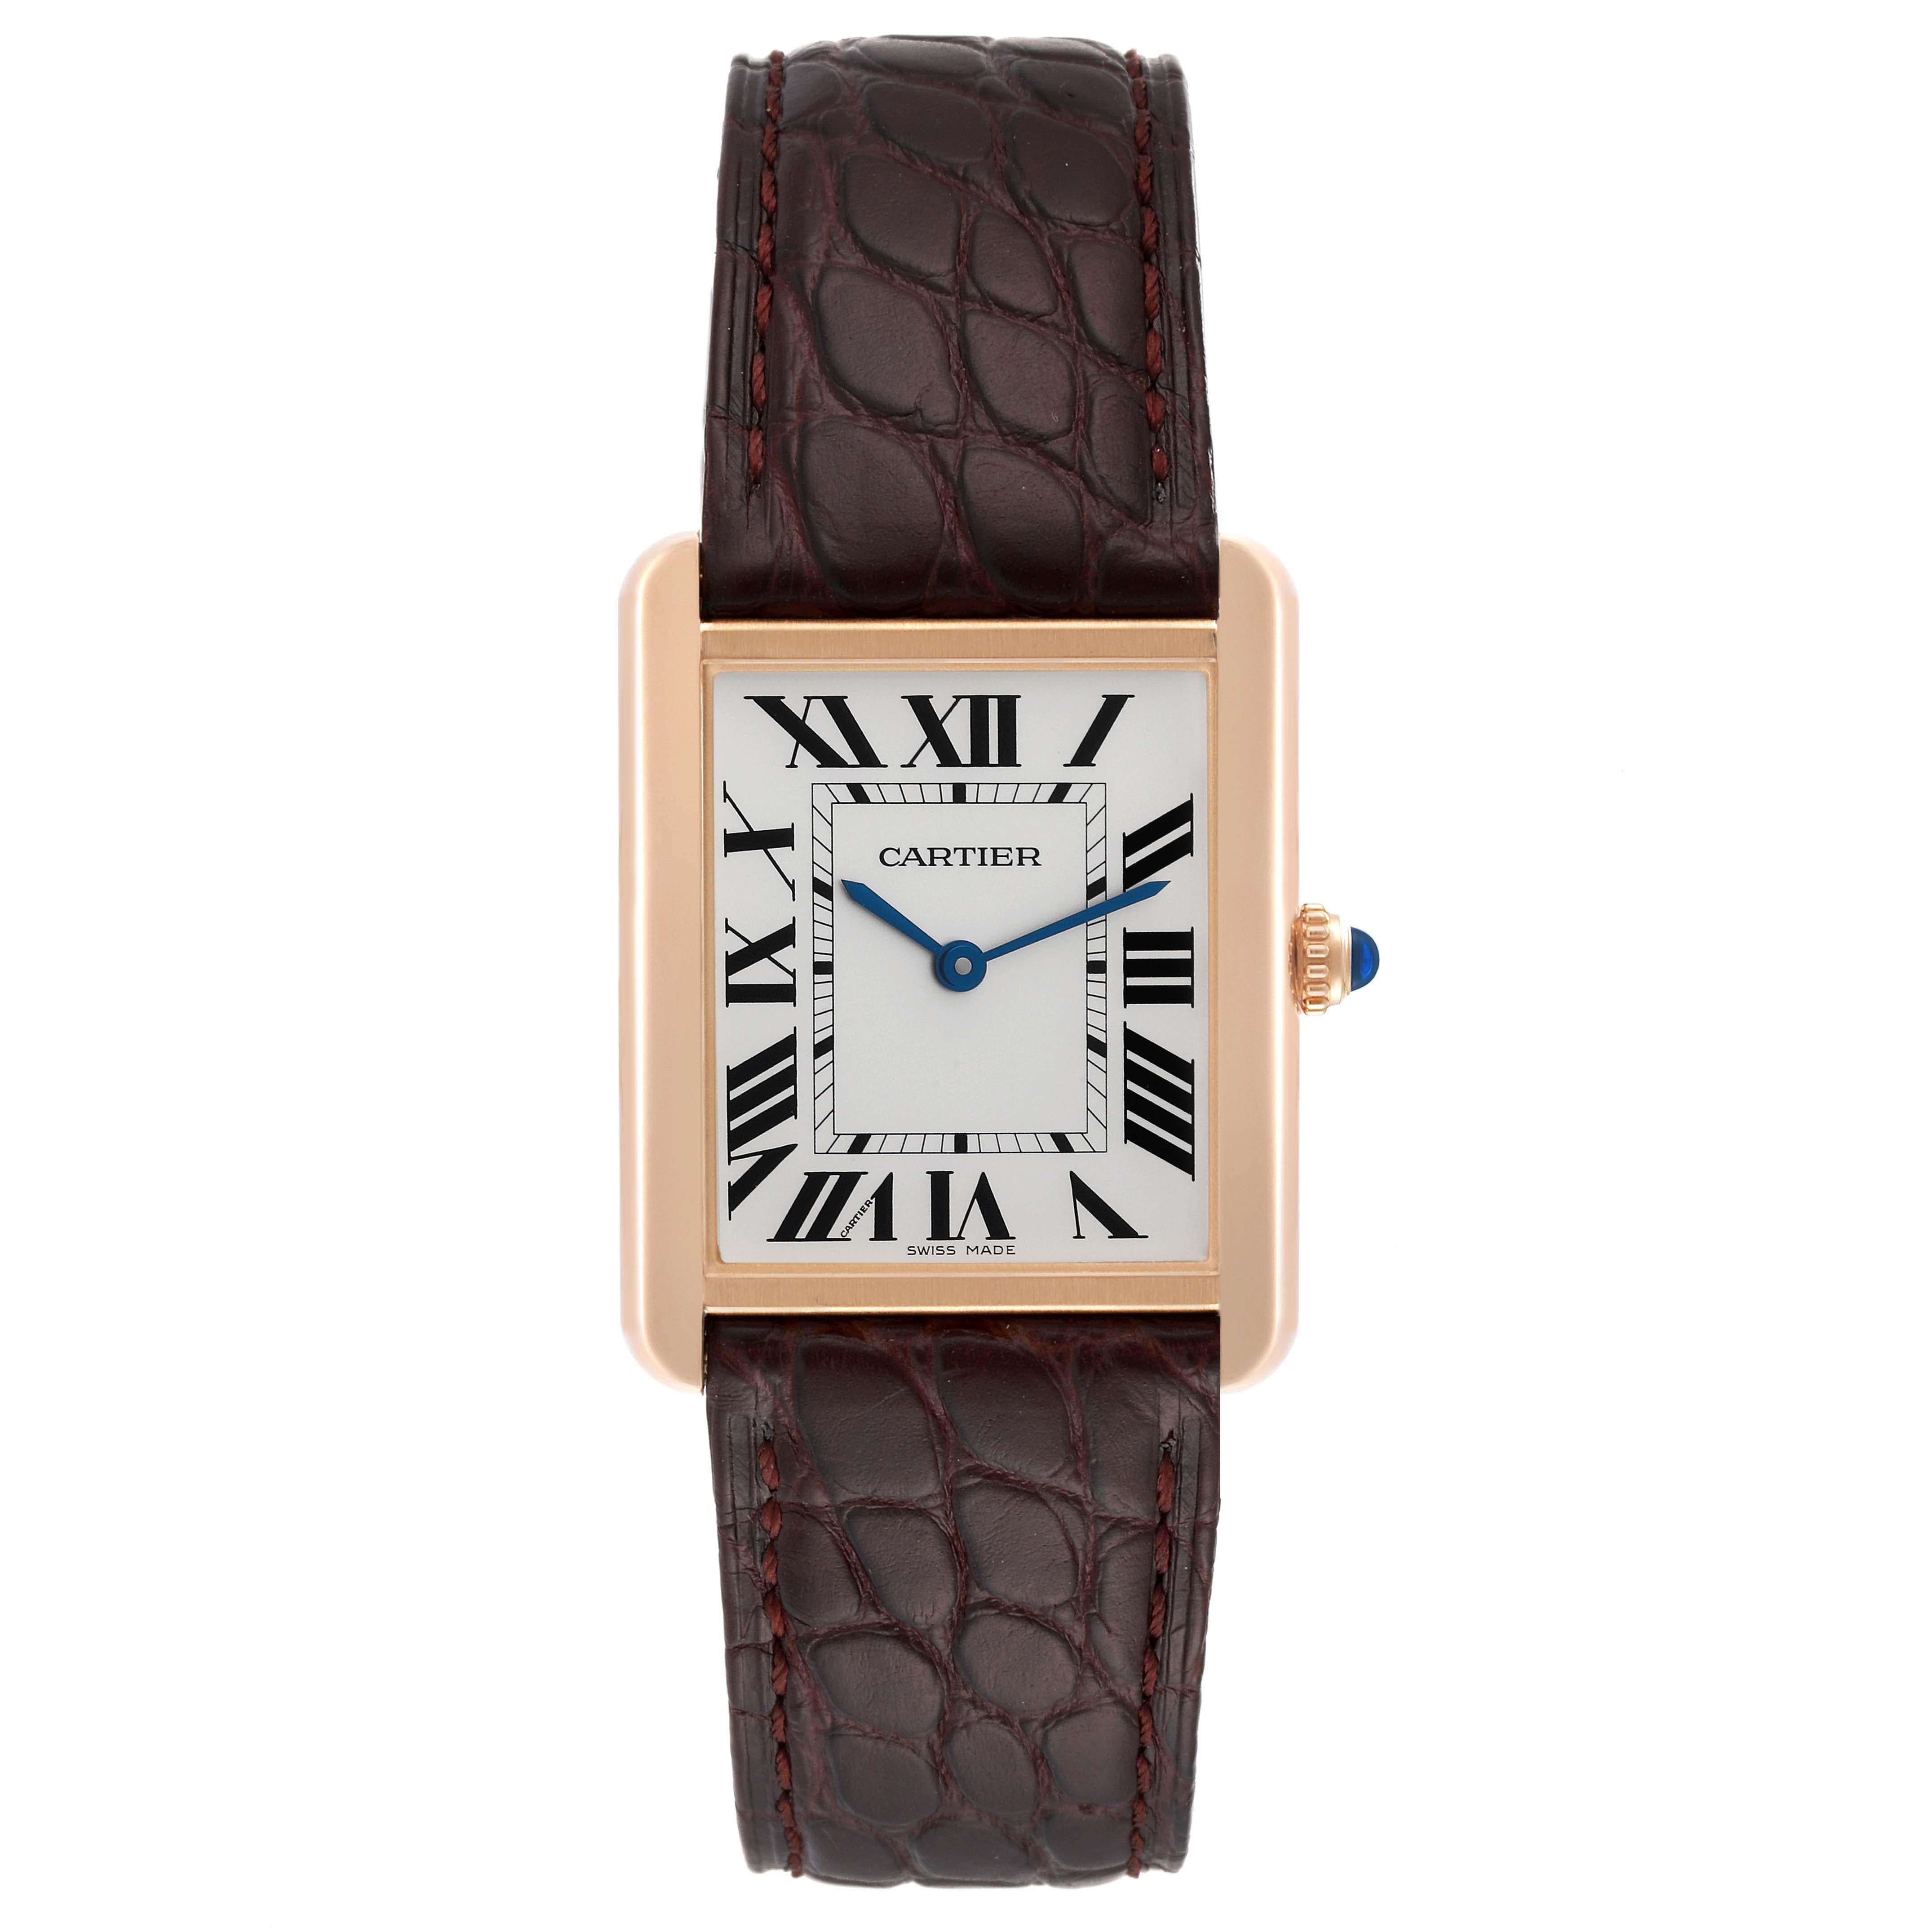 Cartier Tank Solo Large Rose Gold Steel Brown Strap Mens Watch W5200025 Papers. Quartz movement. 18k rose gold case 34.0 x 27.0 mm. Stainless steel caseback. Circular grained crown set with a blue spinel cabochon. . Scratch resistant sapphire